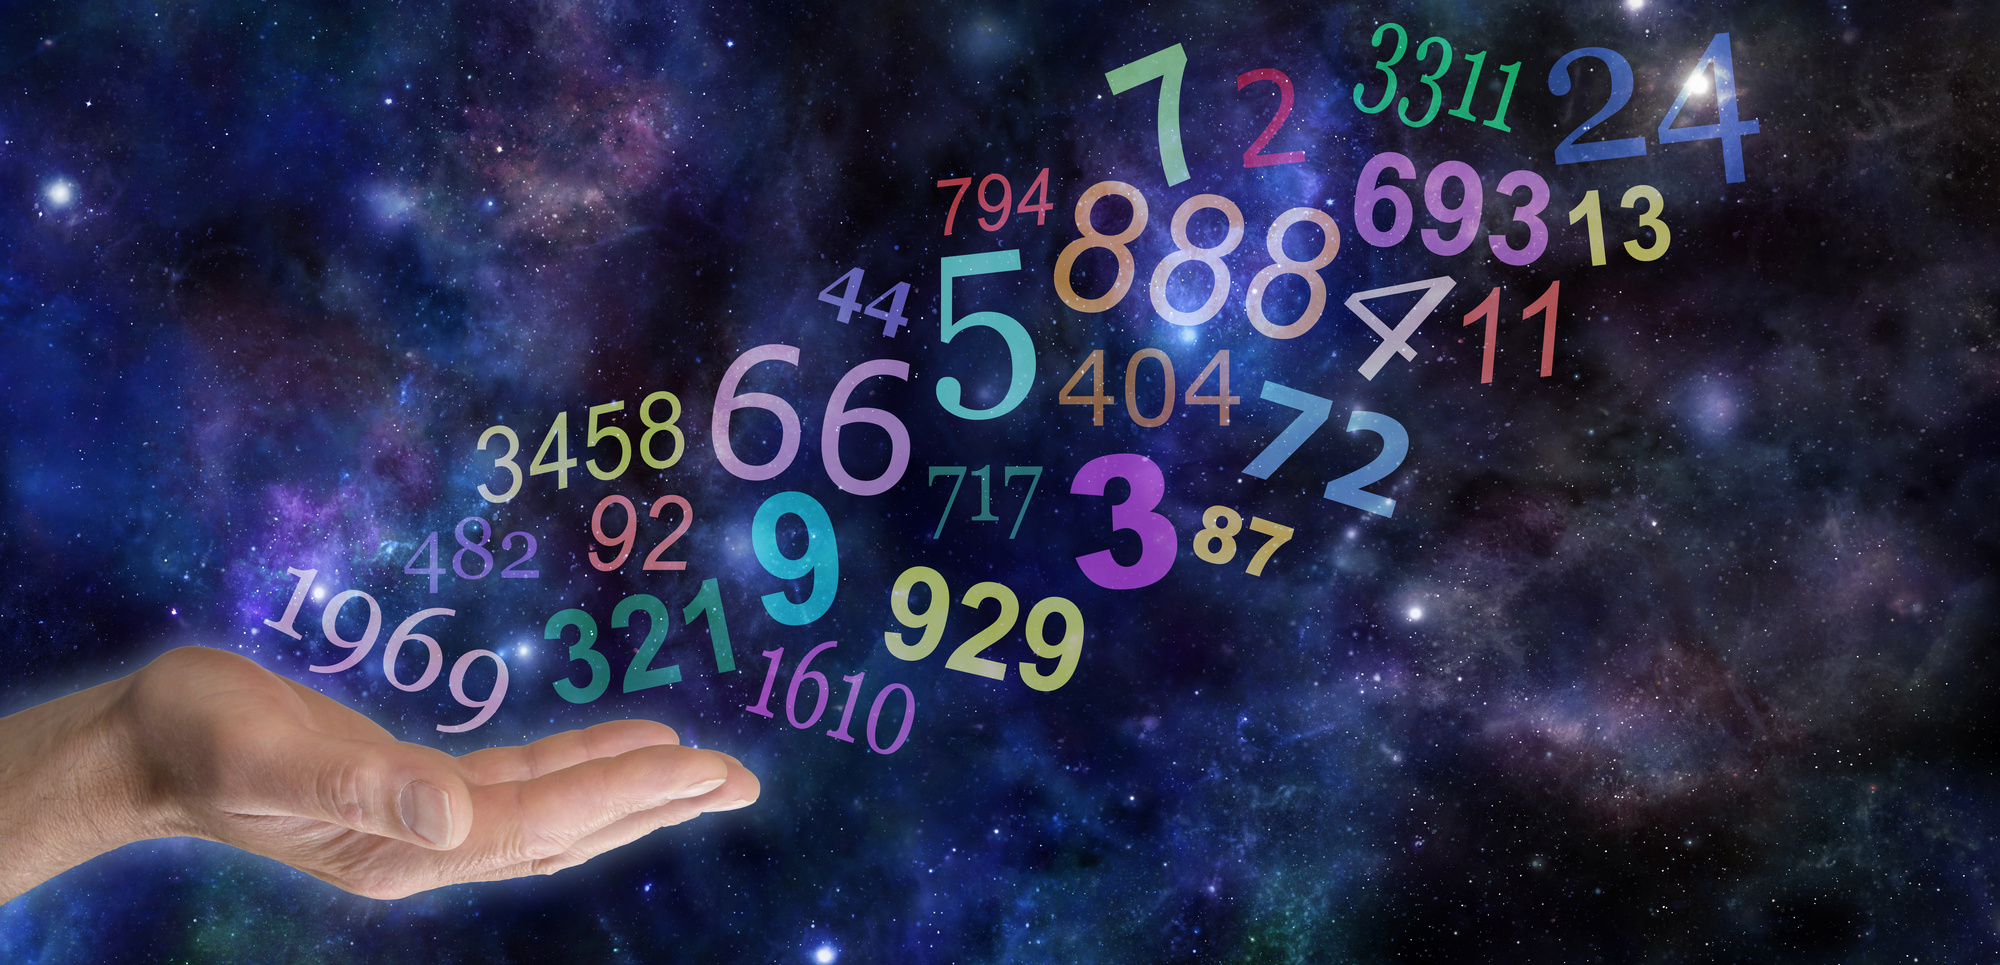 Numerology: Understand The Pinnacles and Challenge Numbers